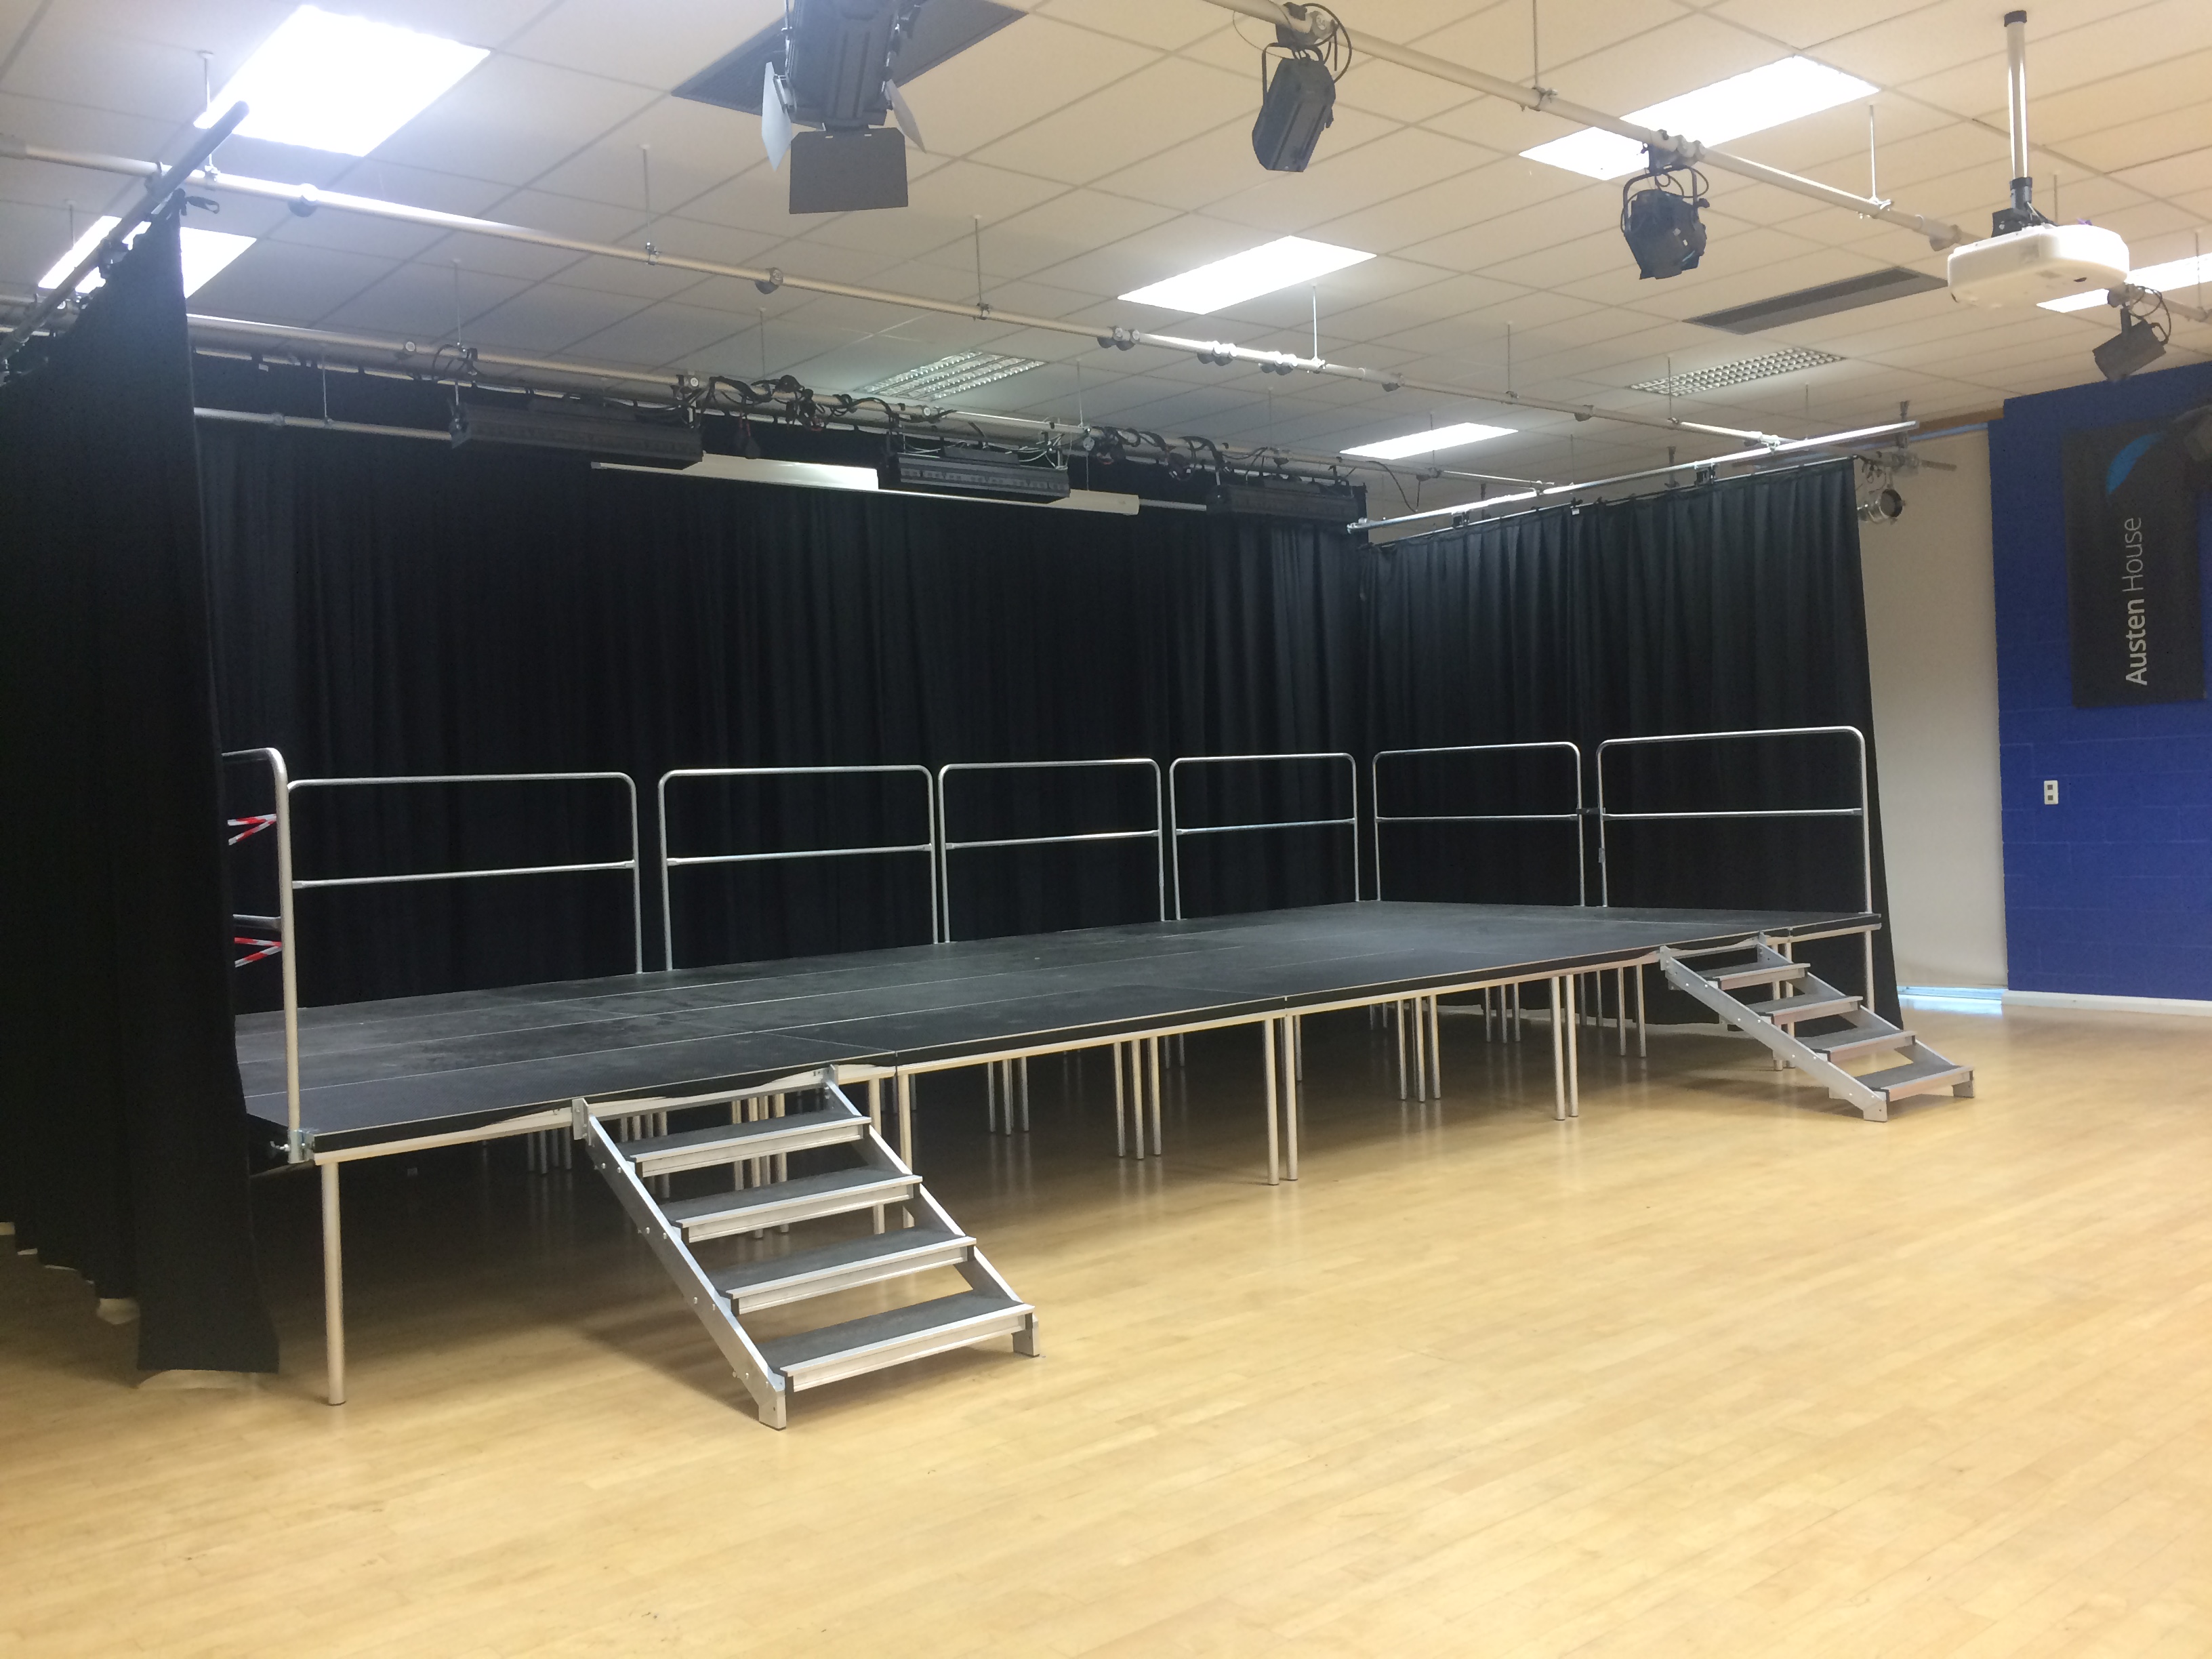 Portable School Stage with curtains by Abacus Stagetech